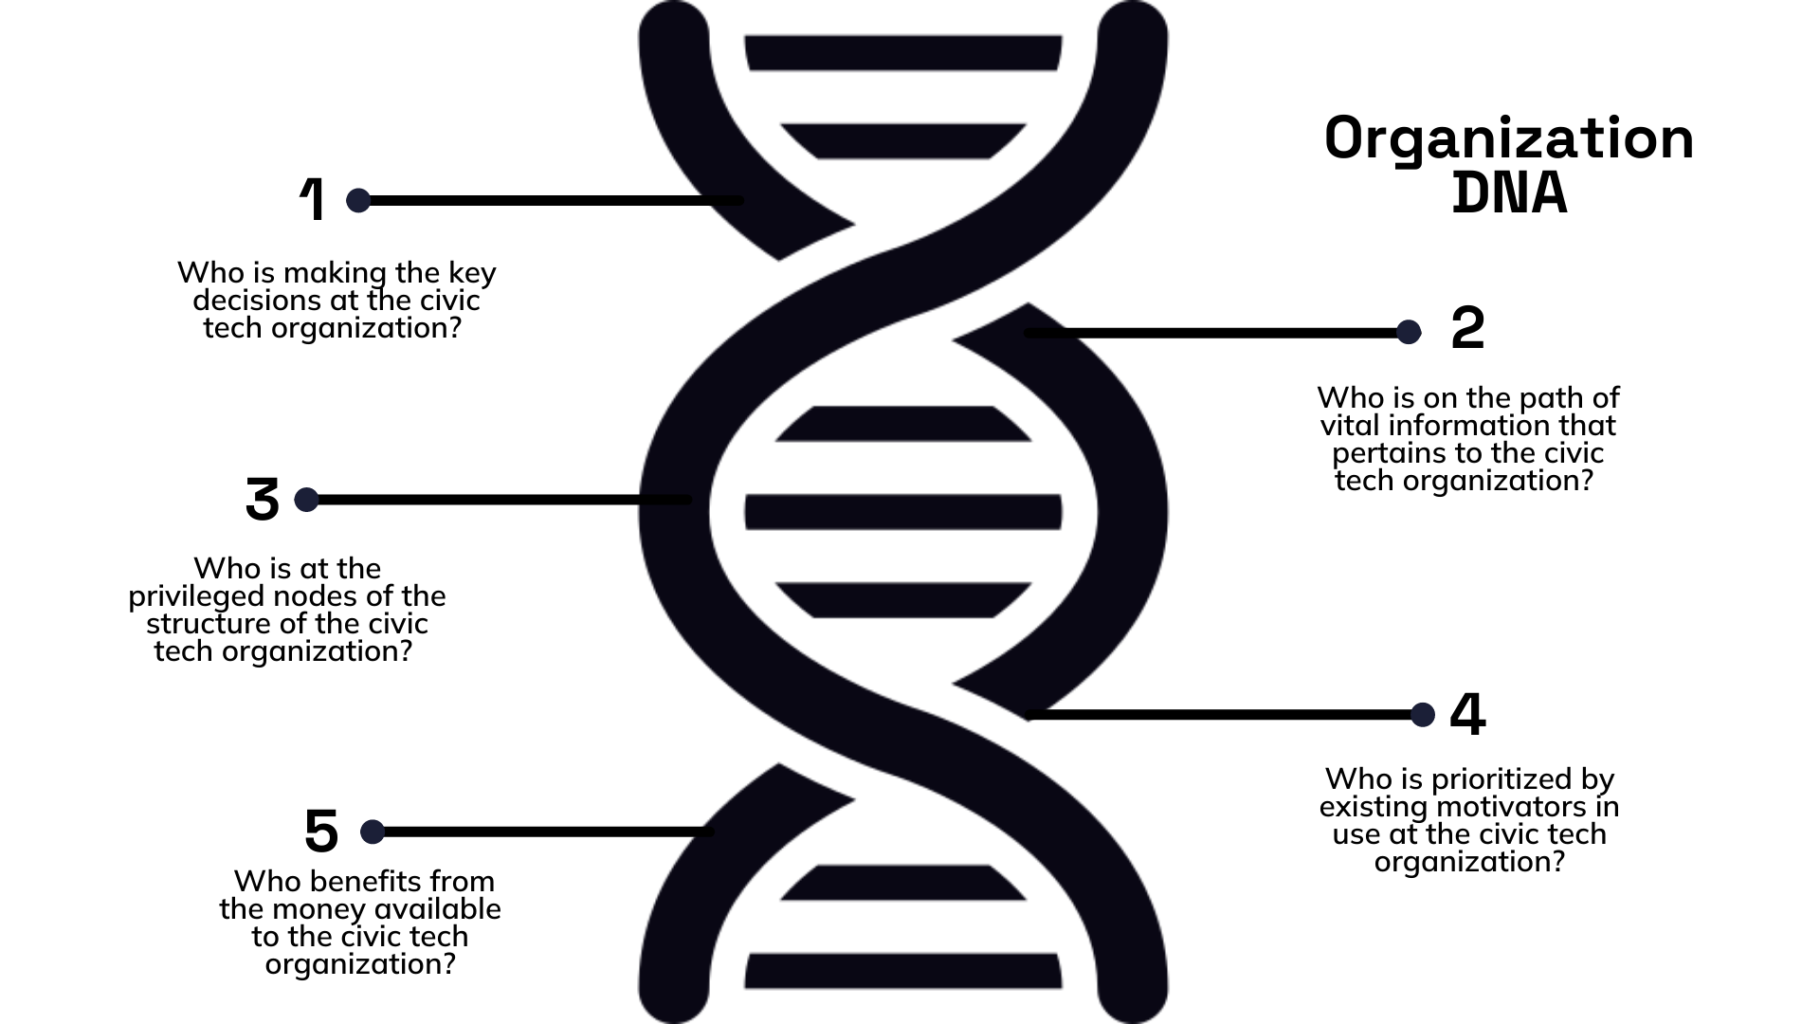 Illustration of a DNA strand with the title "Organization DNA" with 5 points. 1 -  Who is making the key decisions at the civic tech organization? 2 - Who is on the path of vital information that pertains to the civic tech organization? 3 - Who is at the privileged nodes of the structure of the civic tech organization? 4 - Who is prioritized by existing motivators in use of the civic tech organization? 5 - Who benefits from the money available to the civic tech organization?